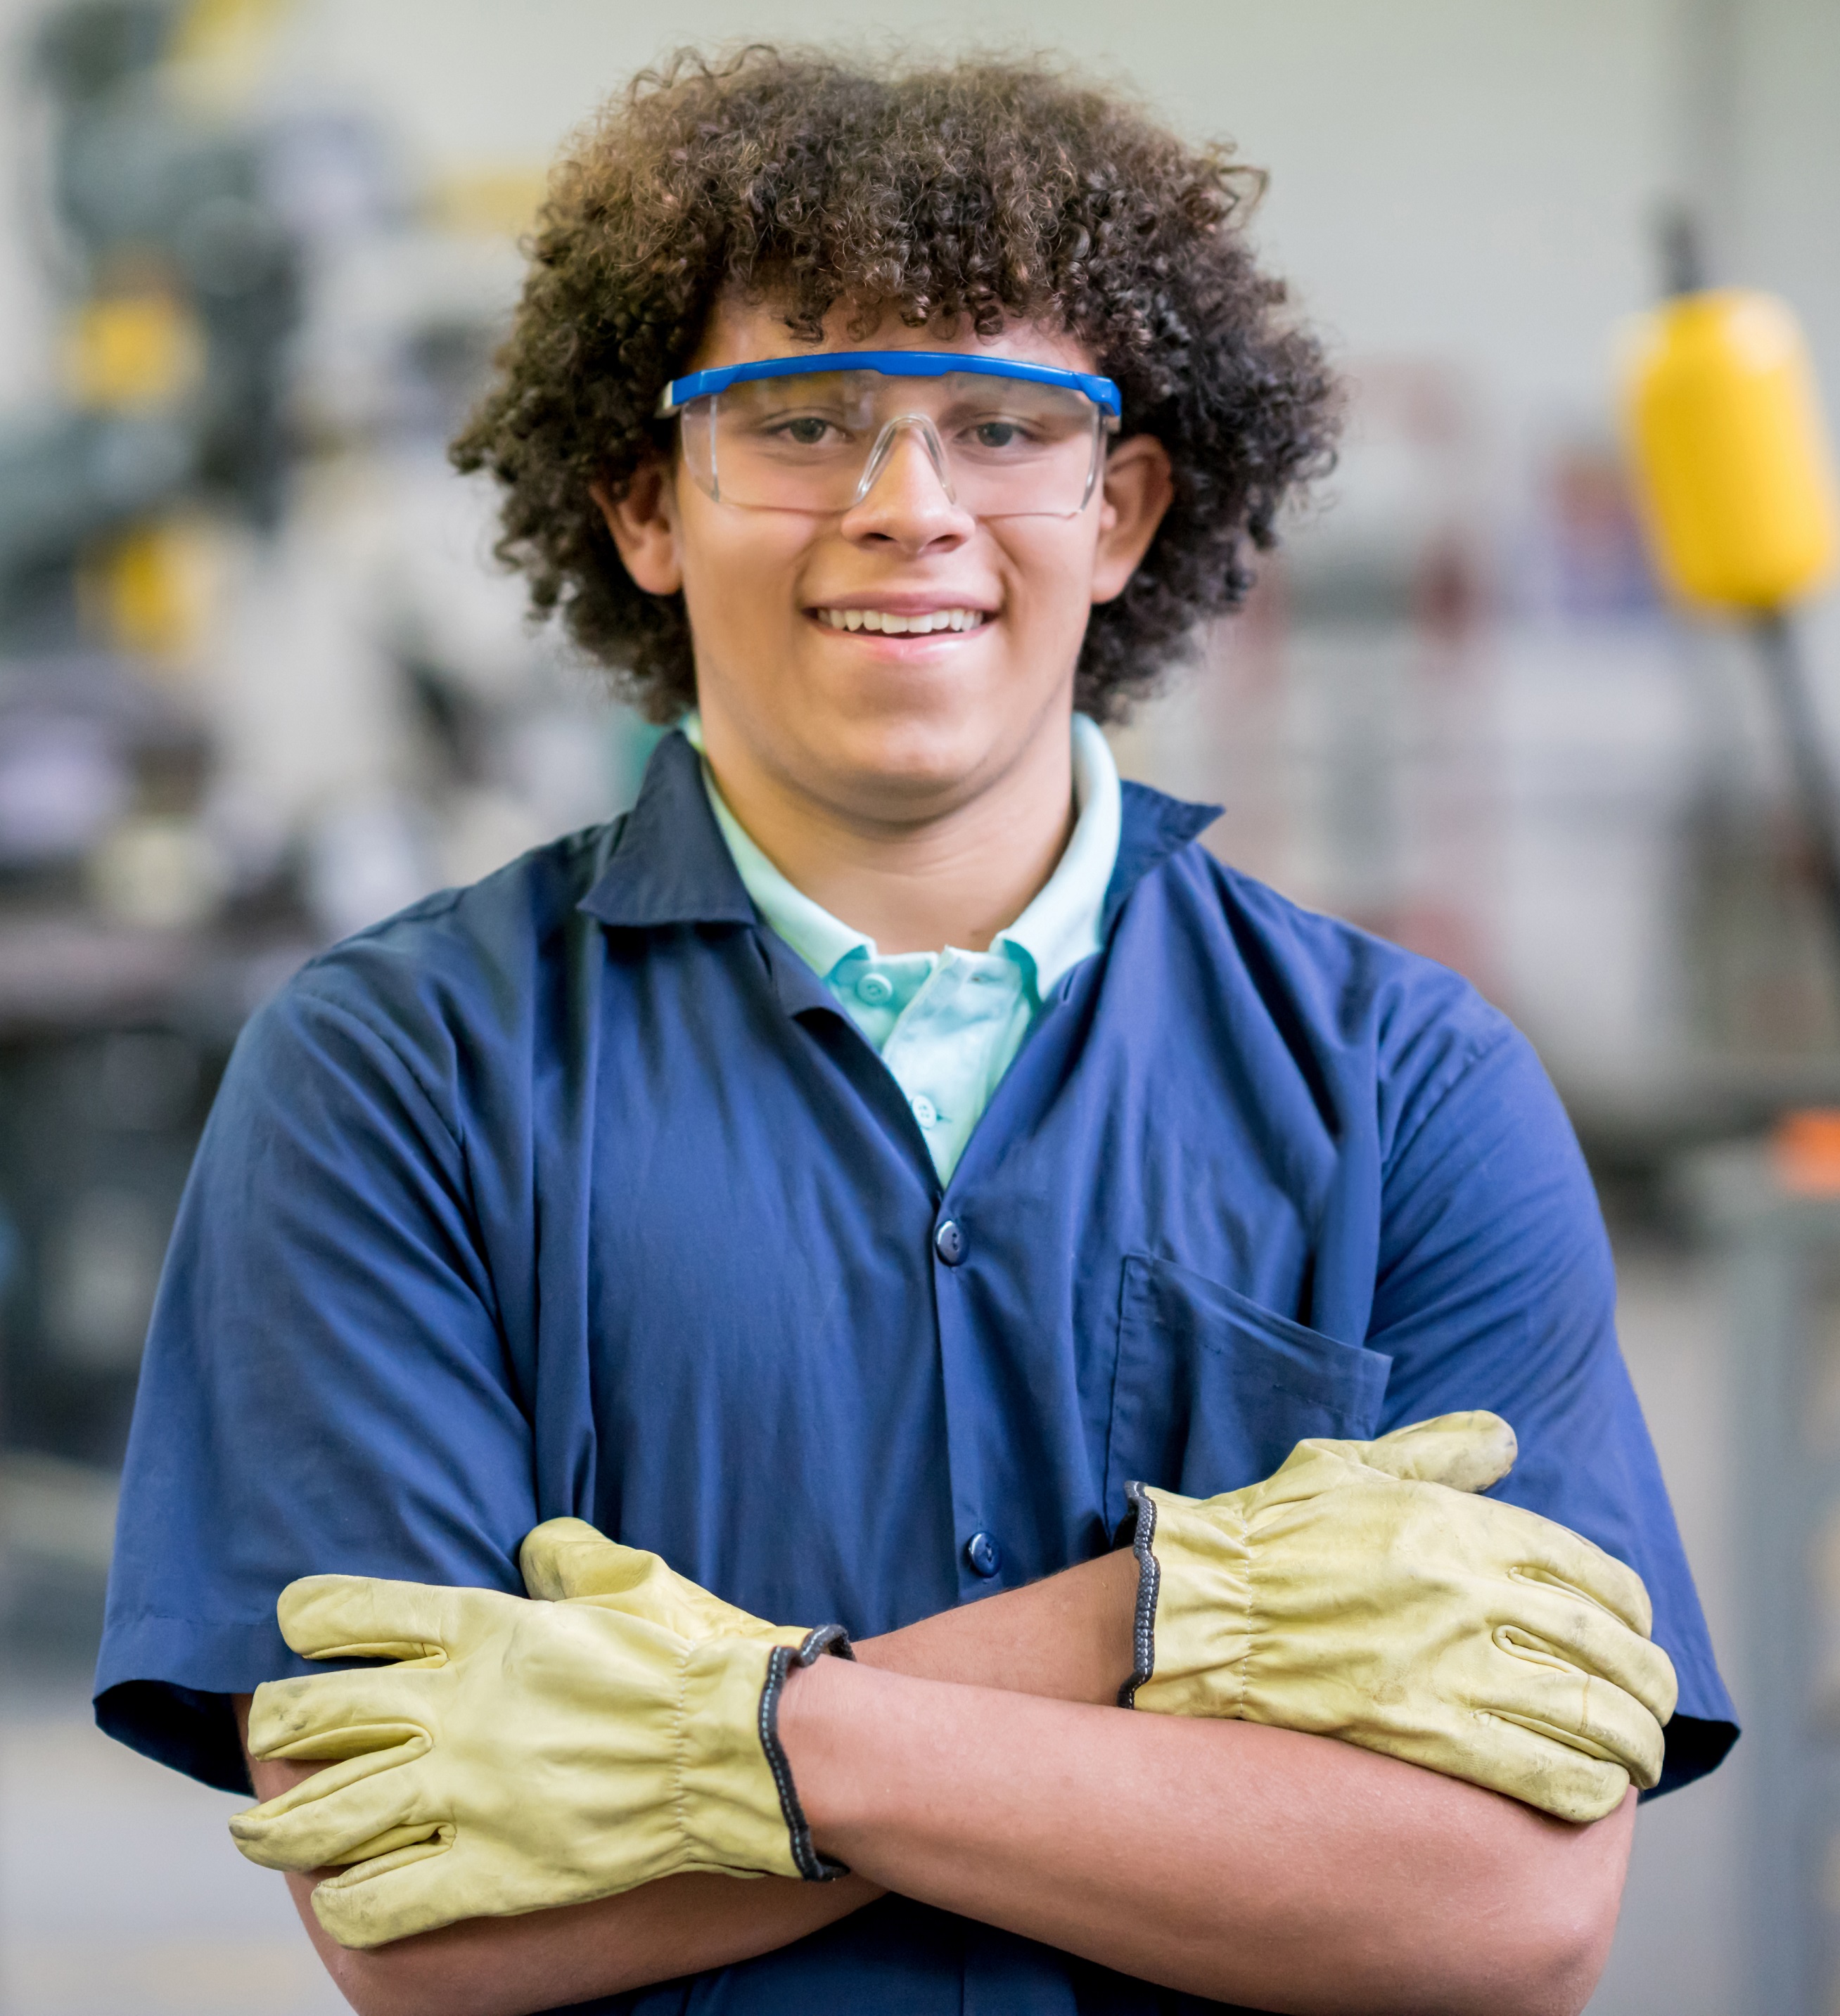 young man with safety goggles